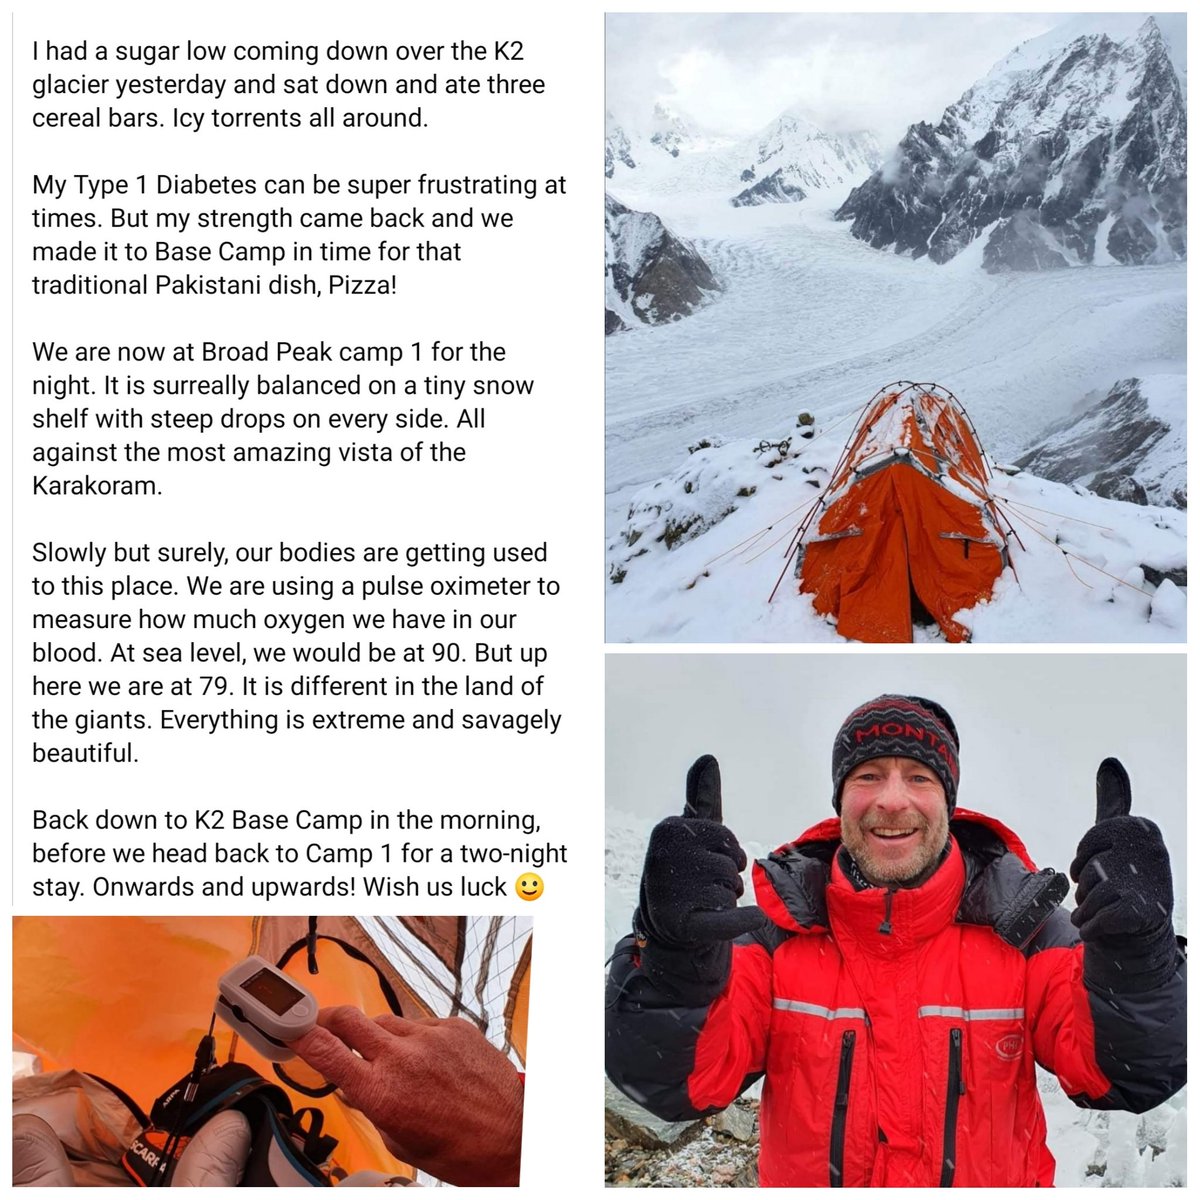 A truly amazing Jerry 💞 My prayers are with him daily. #t1champion #t1warrior He is going to be the first British #T1D to climb the treacherous K2 to raise funds for @Action4Diabetes a UK charity saving lives of children in Southeast Asia. #doc #GBDoc